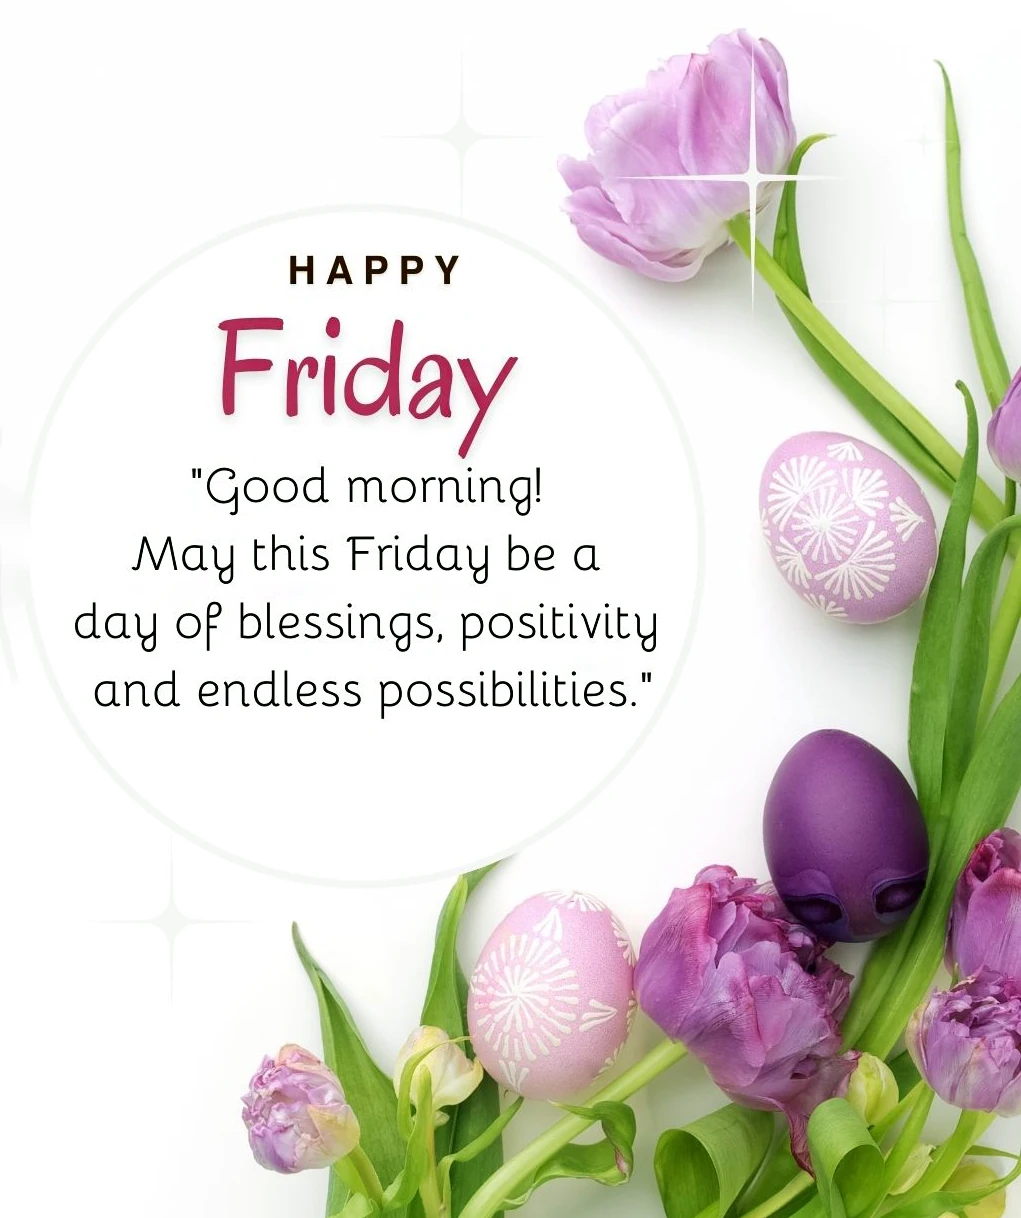 Happy Friday Good mornig may this friday be a day of blessings positivity and endless possibiliteis